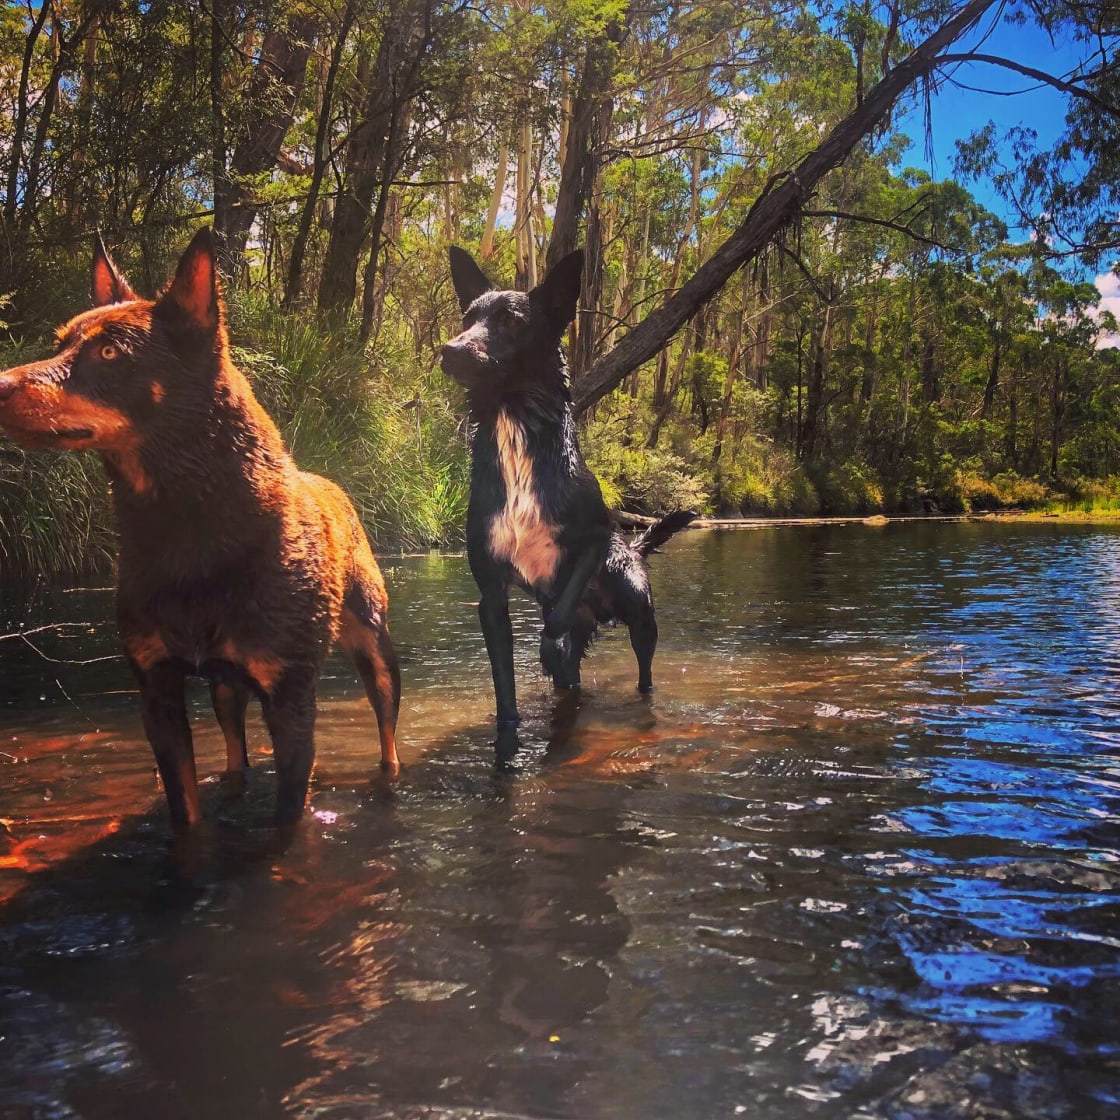 Dogs in the river